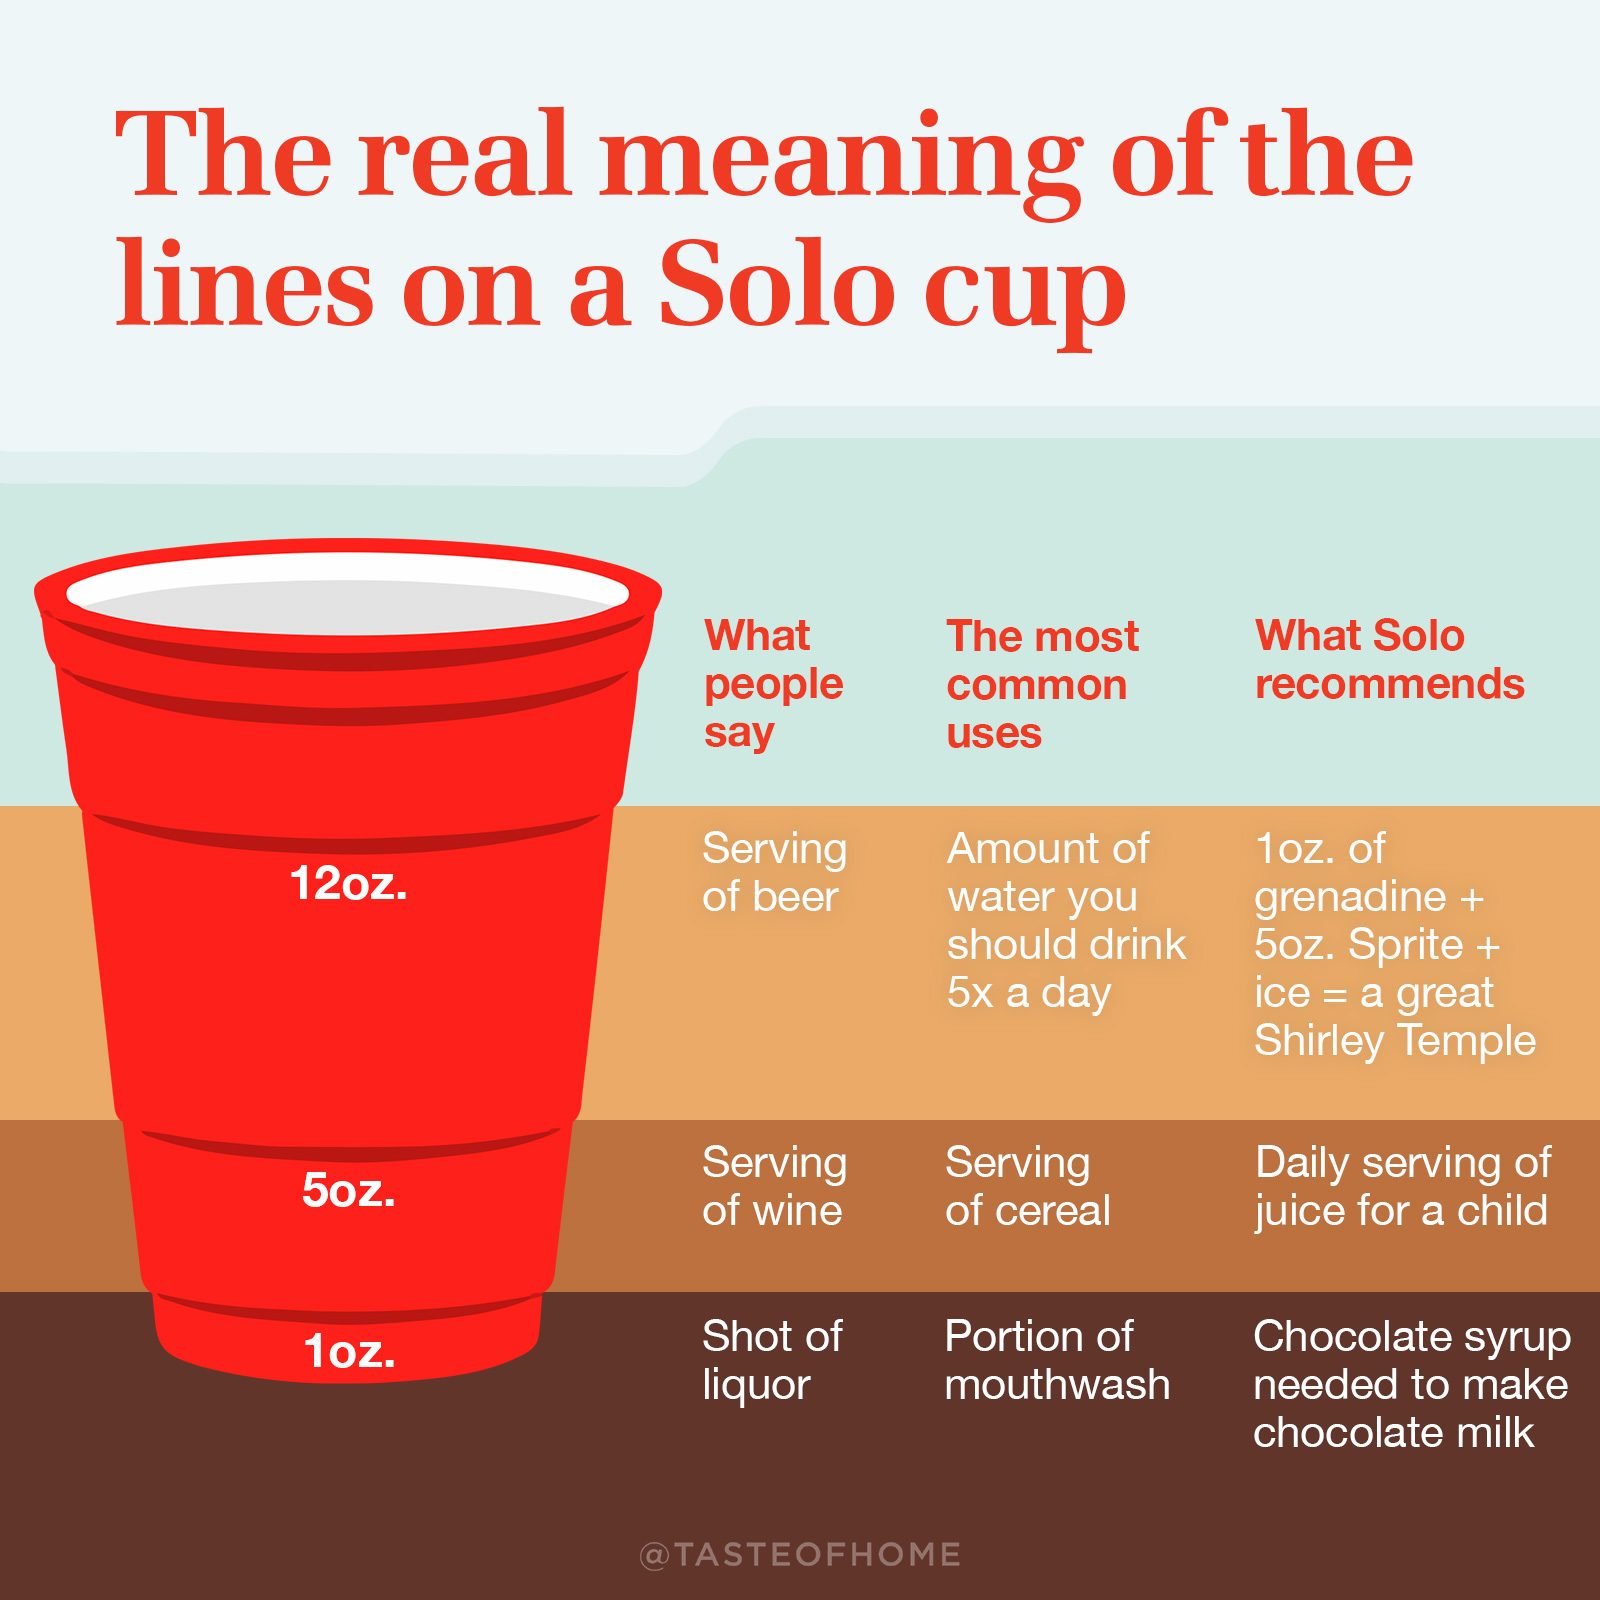 https://www.tasteofhome.com/wp-content/uploads/2021/08/TOH-The-real-meaning-of-the-lines-on-a-Solo-cup.jpg?fit=680%2C680